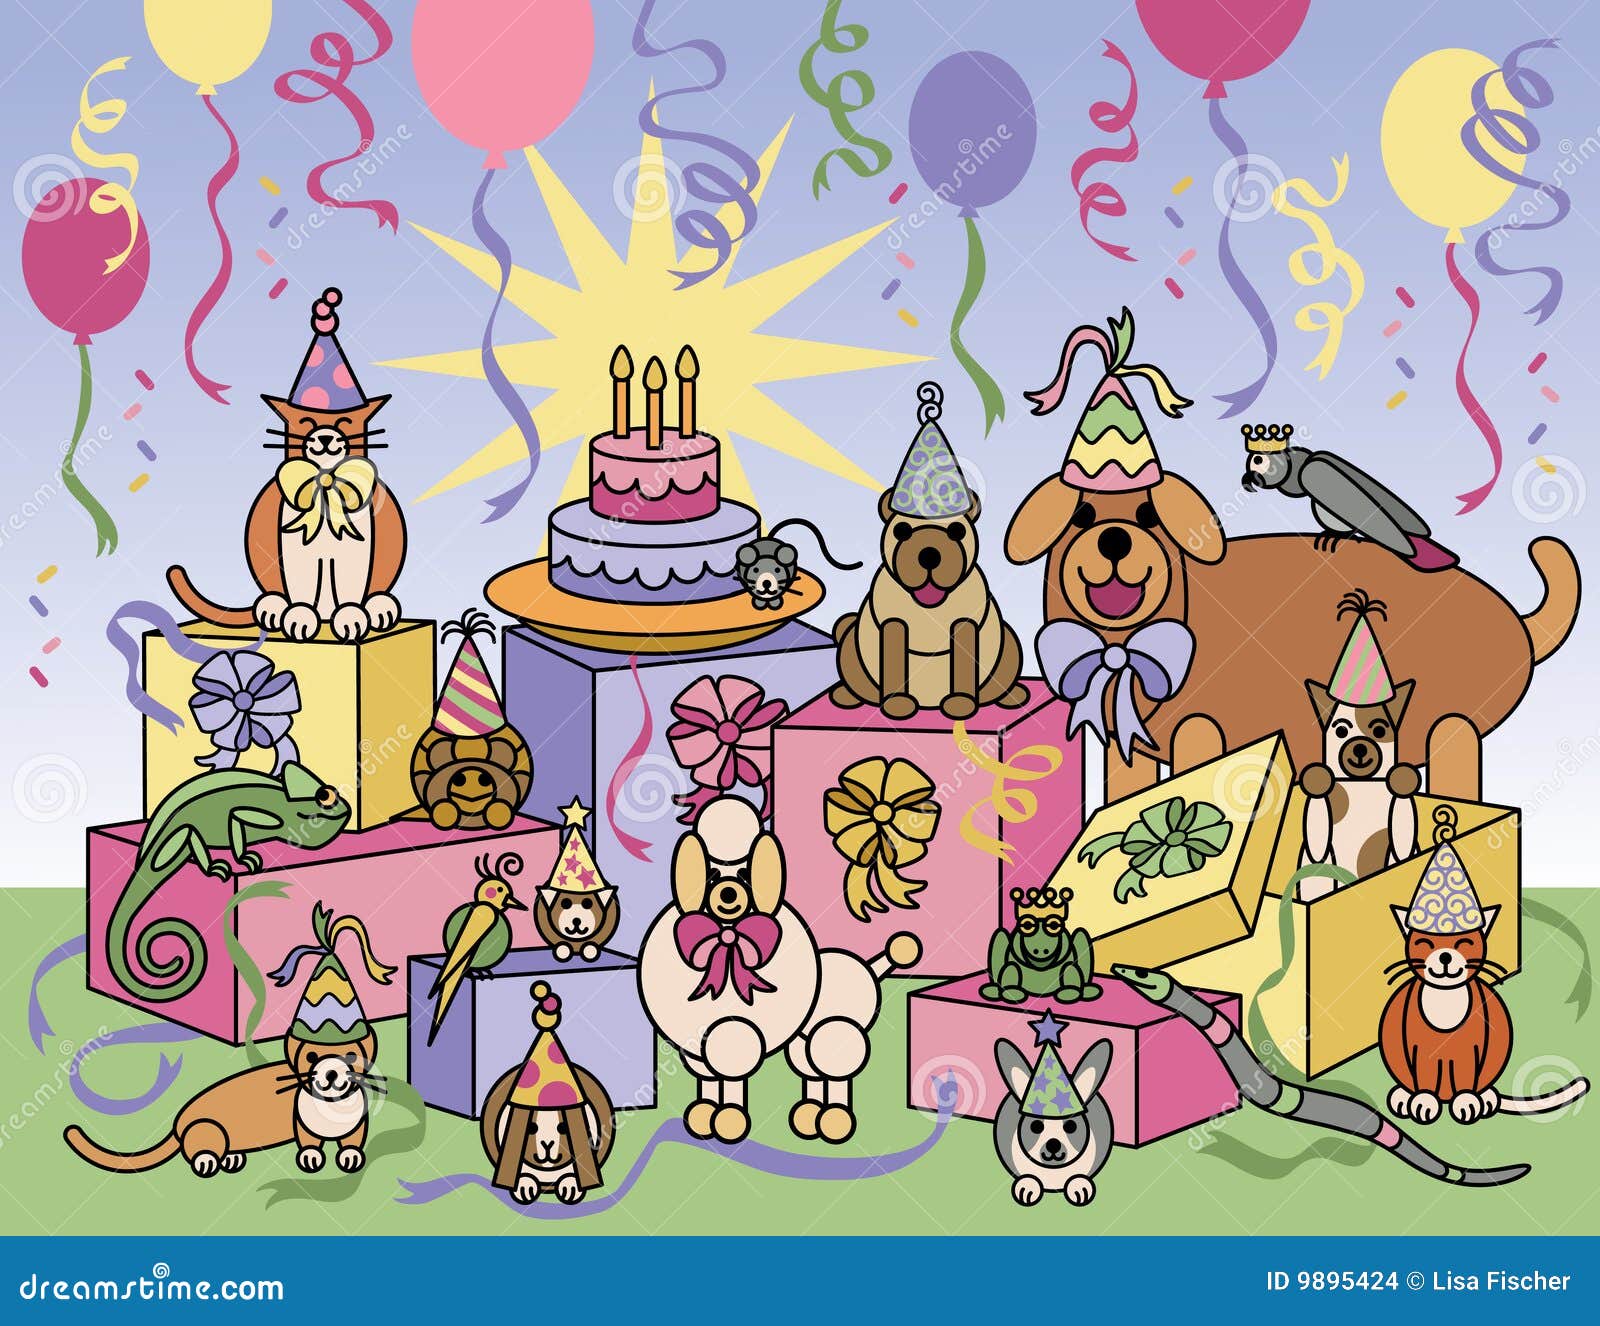 Party Animals Stock Images - Image: 9895424